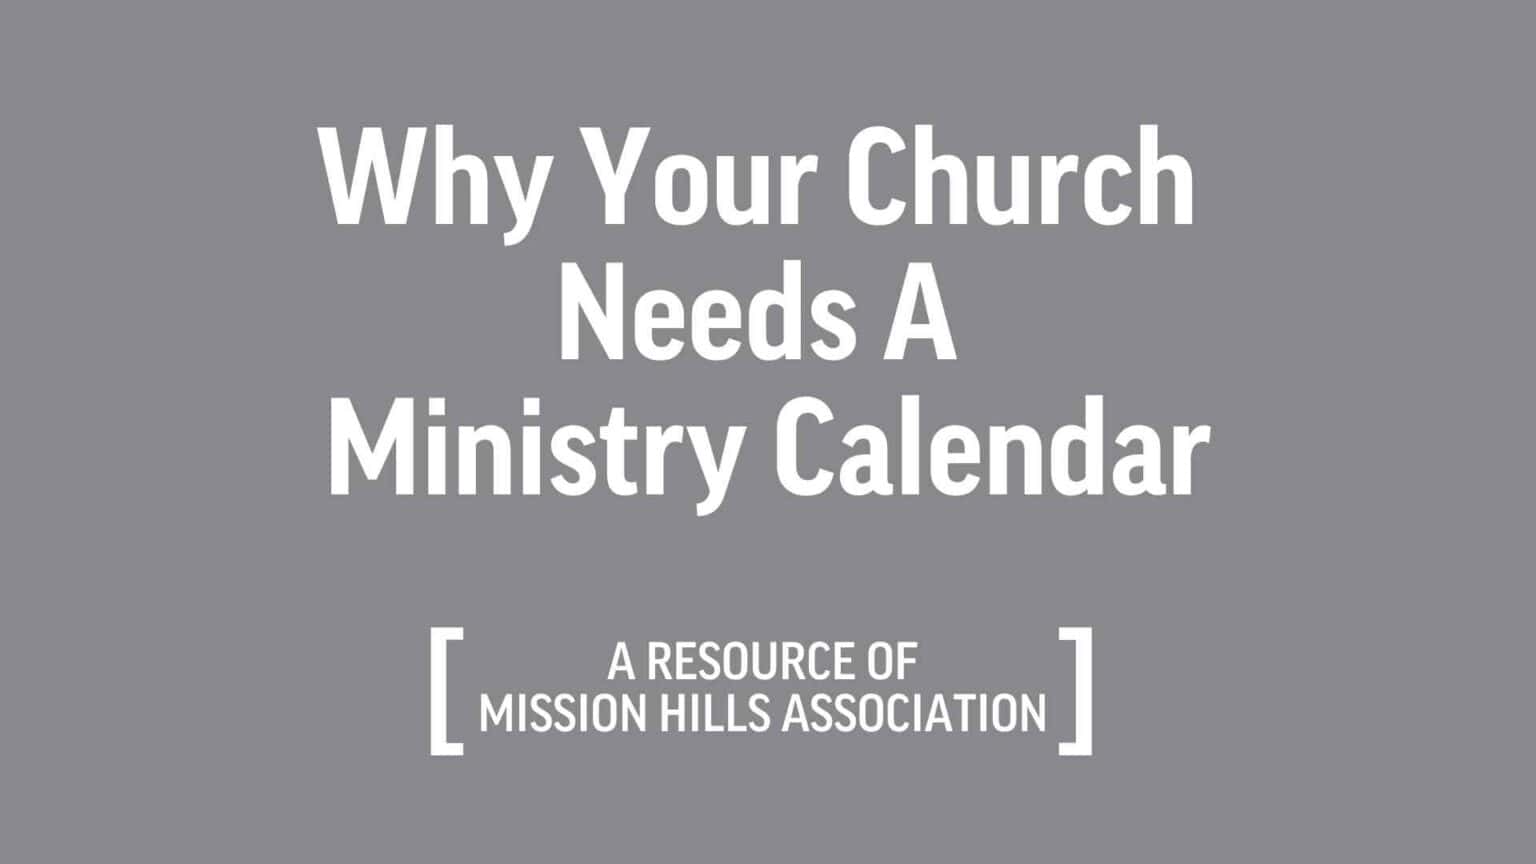 Why Your Church Needs a Ministry Calendar